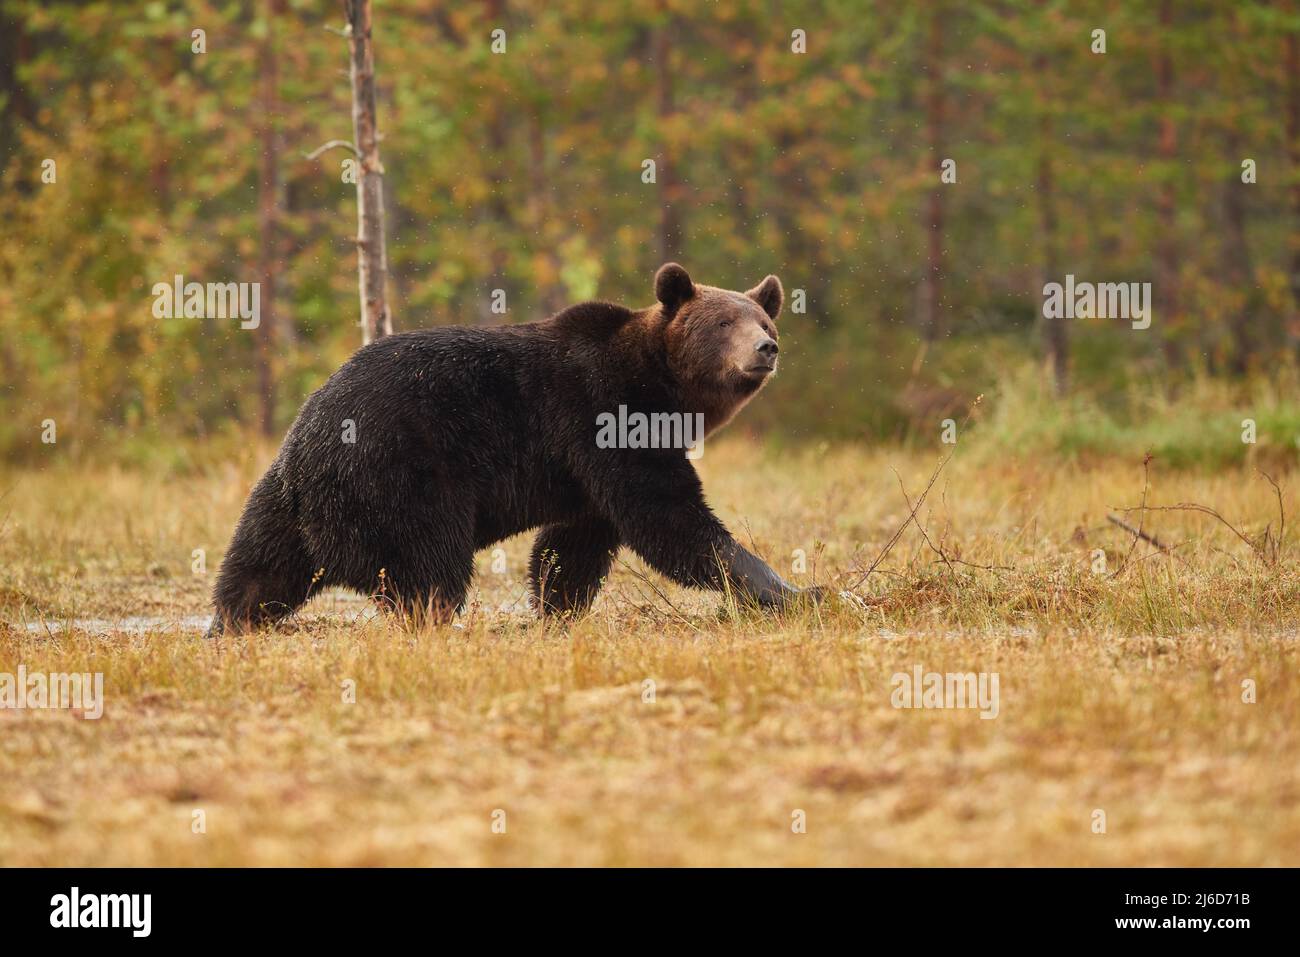 A brown bear walking looking cautiously around Stock Photo